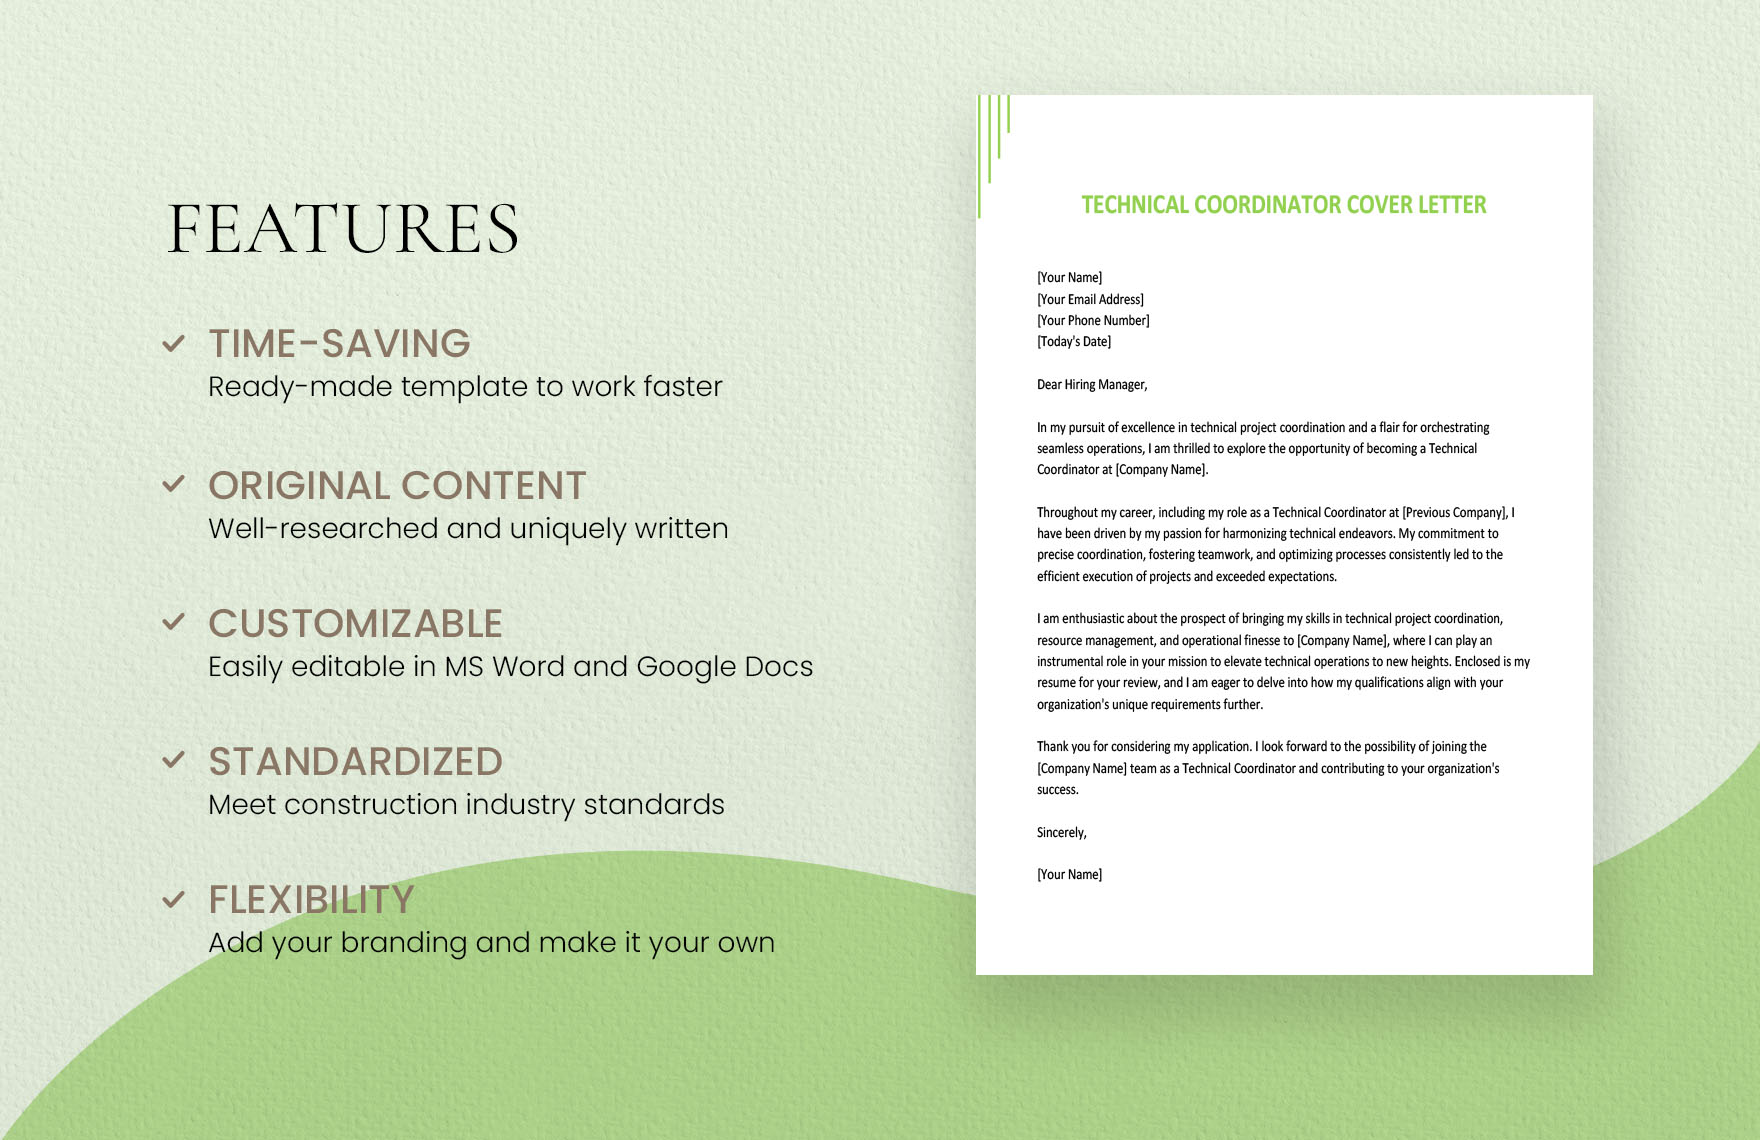 Technical Coordinator Cover Letter